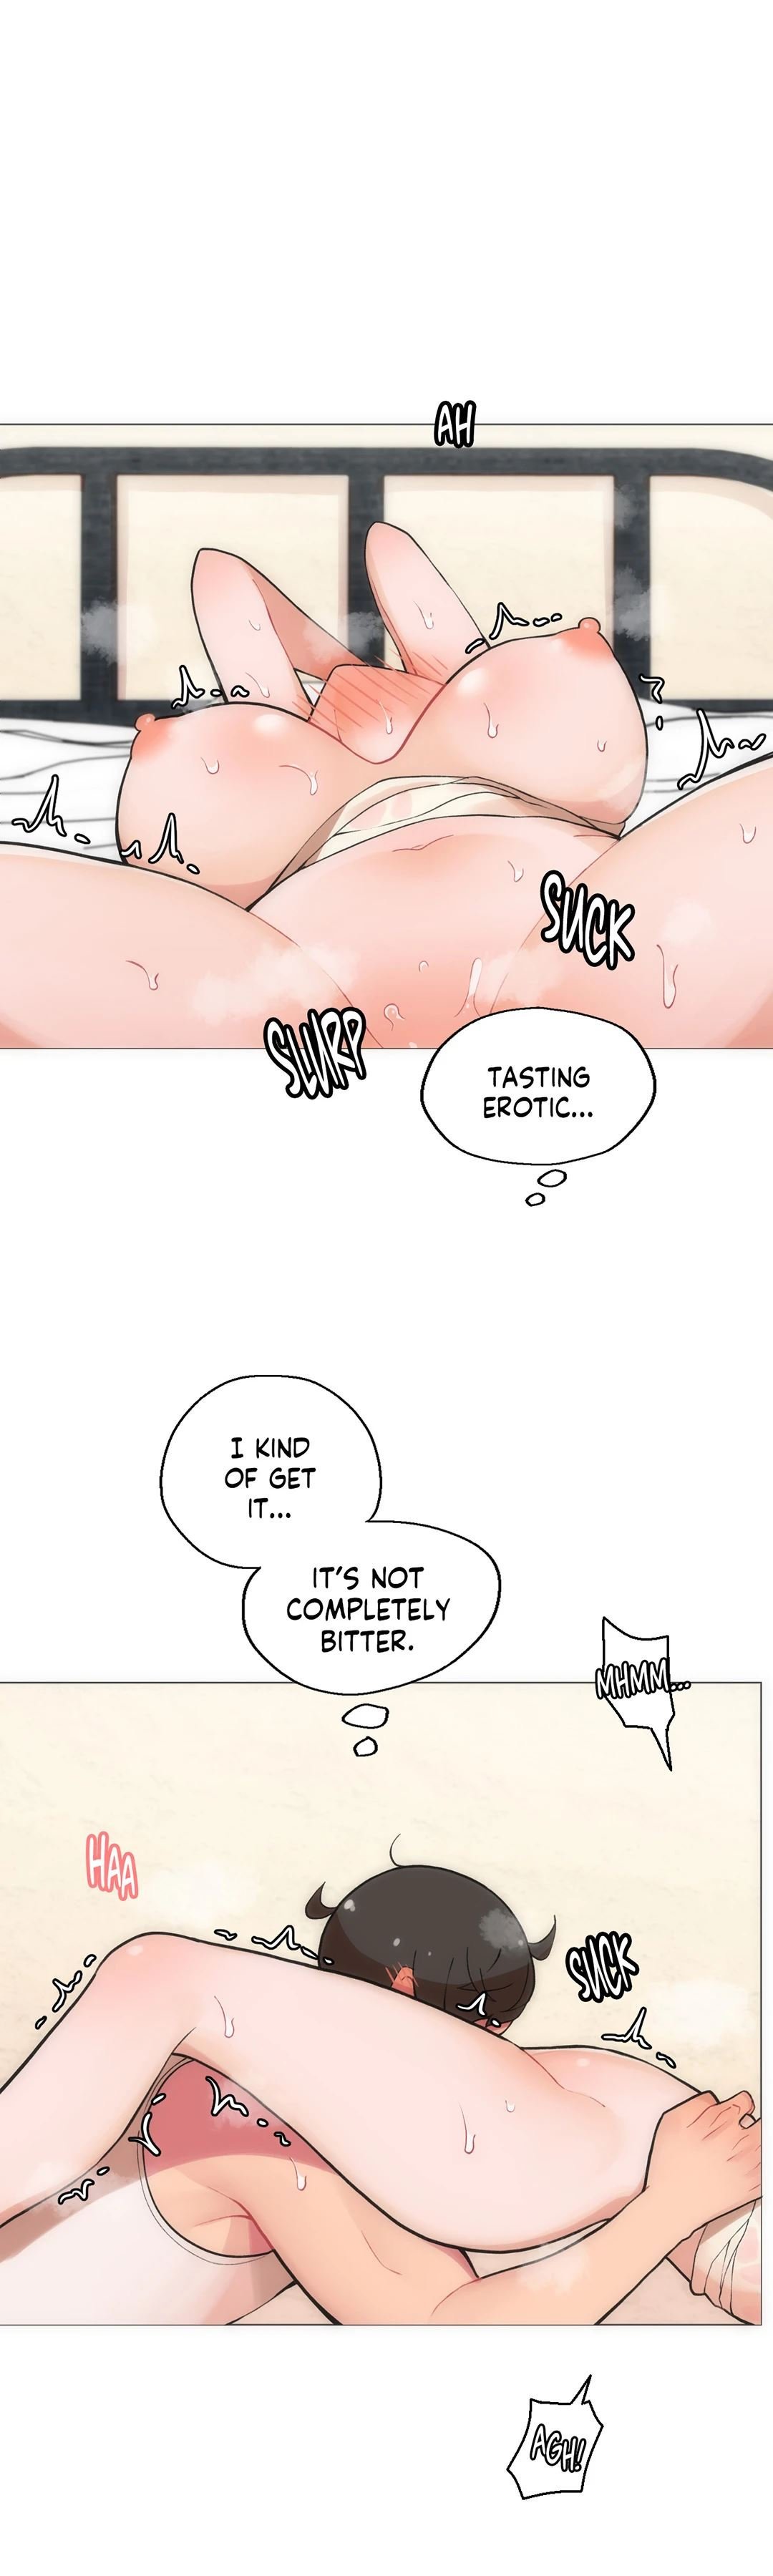 sexcape-room-good-game-chap-3-28